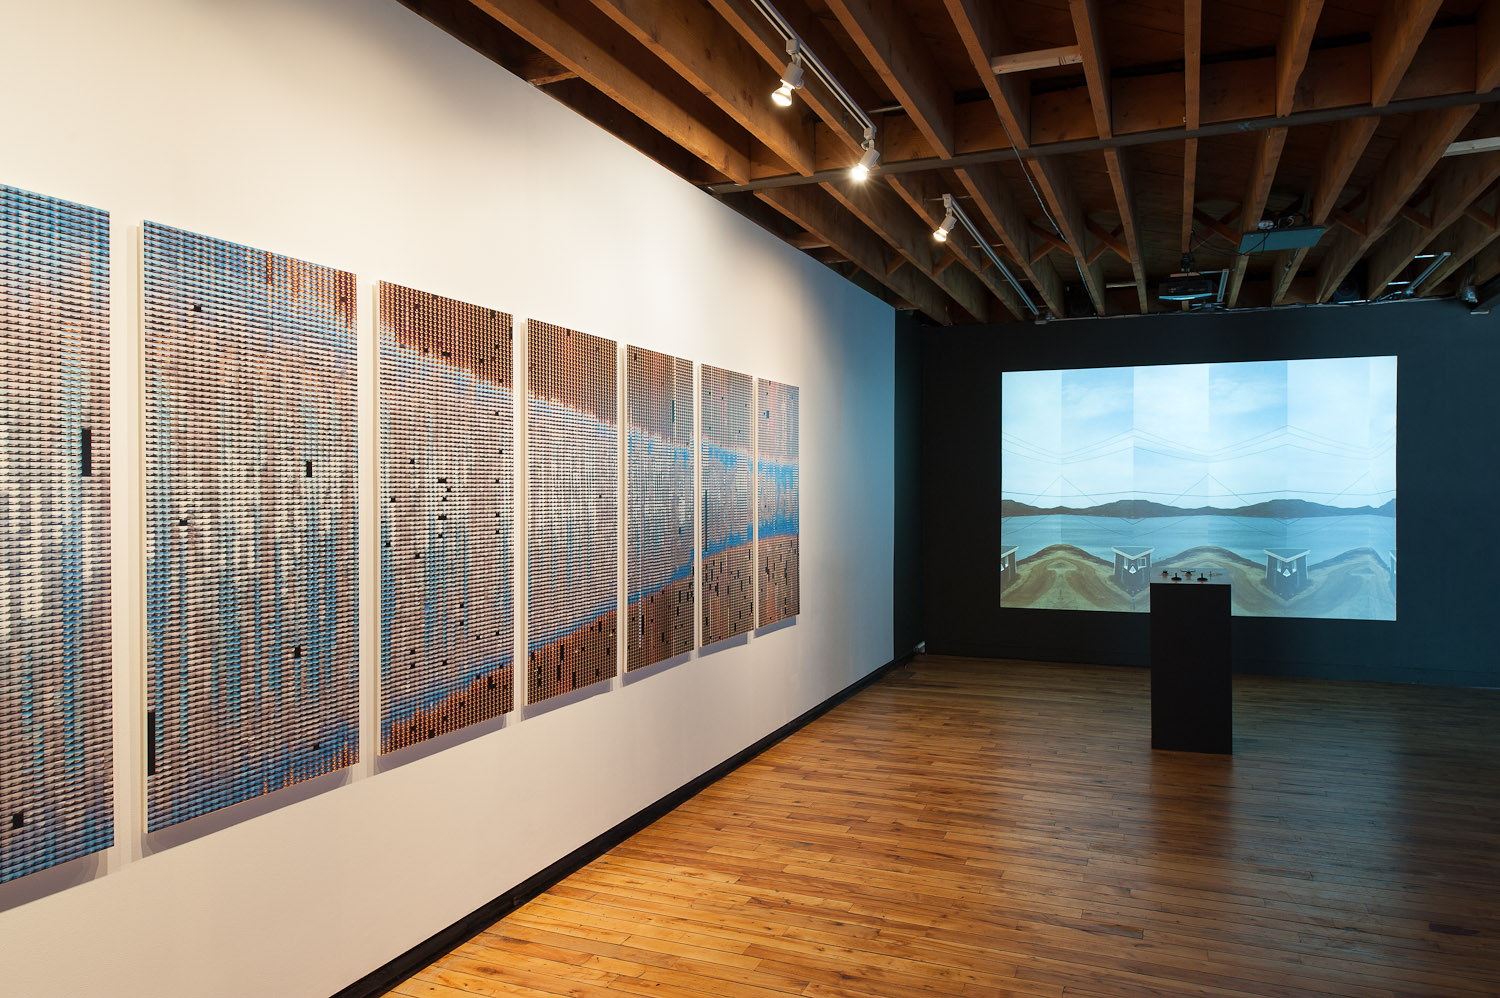 Constructed Land, InterAccess 2012